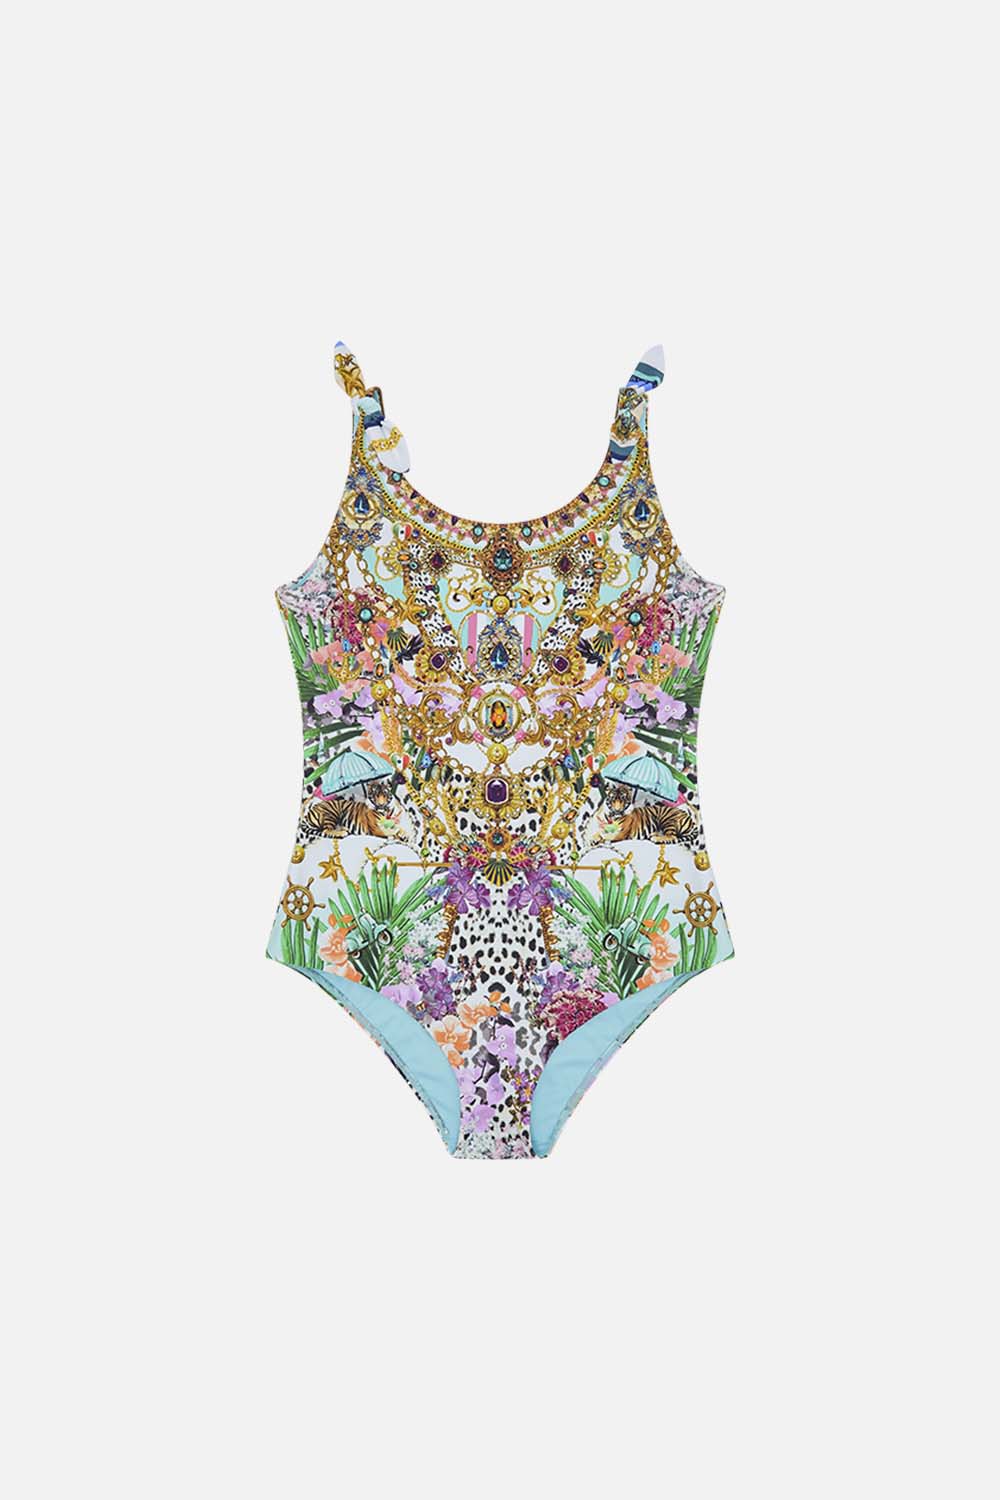 Product view of MILLA BY CAMILLA kids one piece swimsuit in Dear Amore Mio print